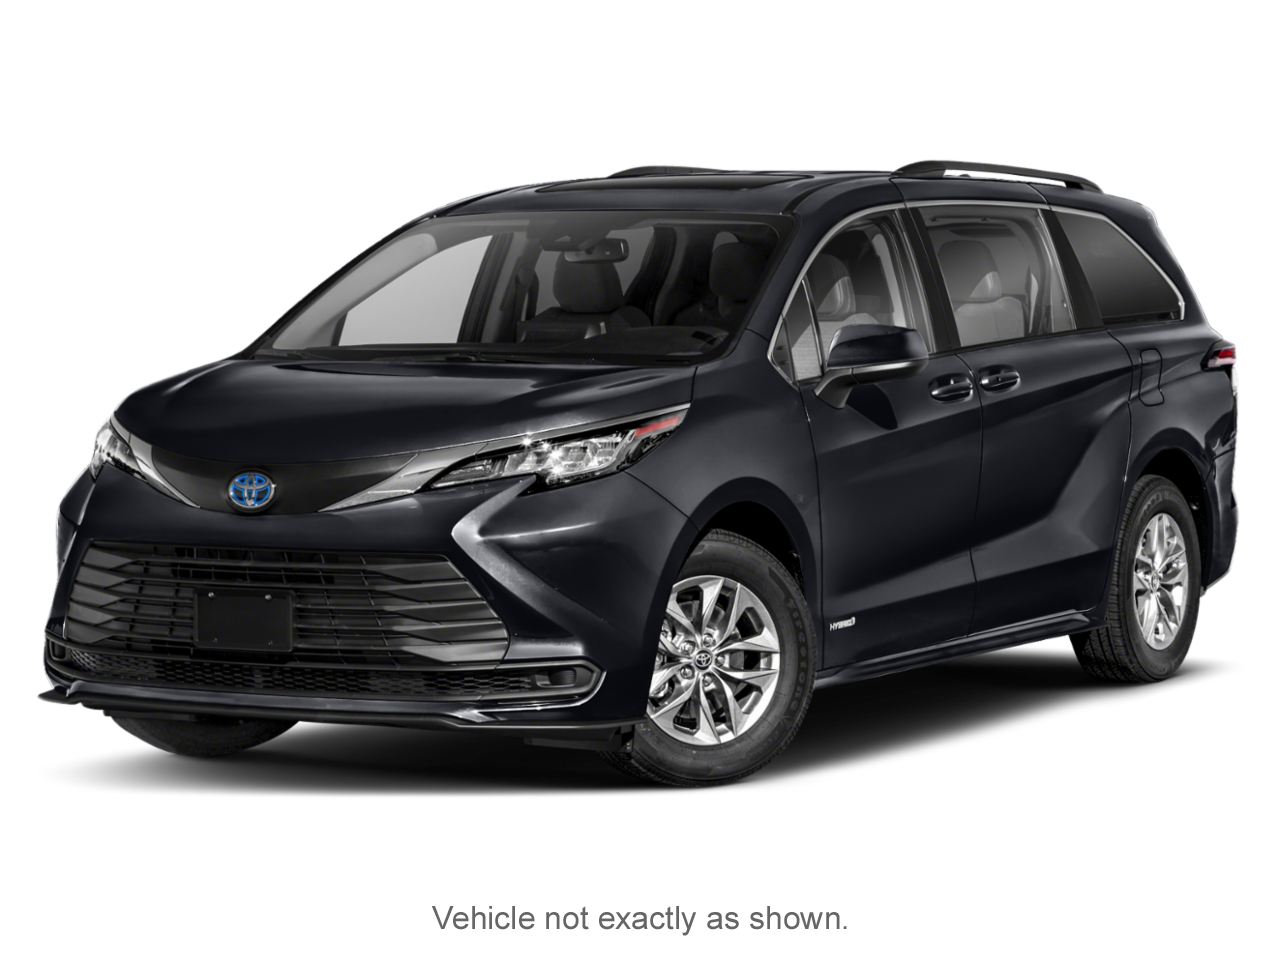 2022 Toyota Sienna Sienna LE AWD 8-Pass |LE PACKAGE|